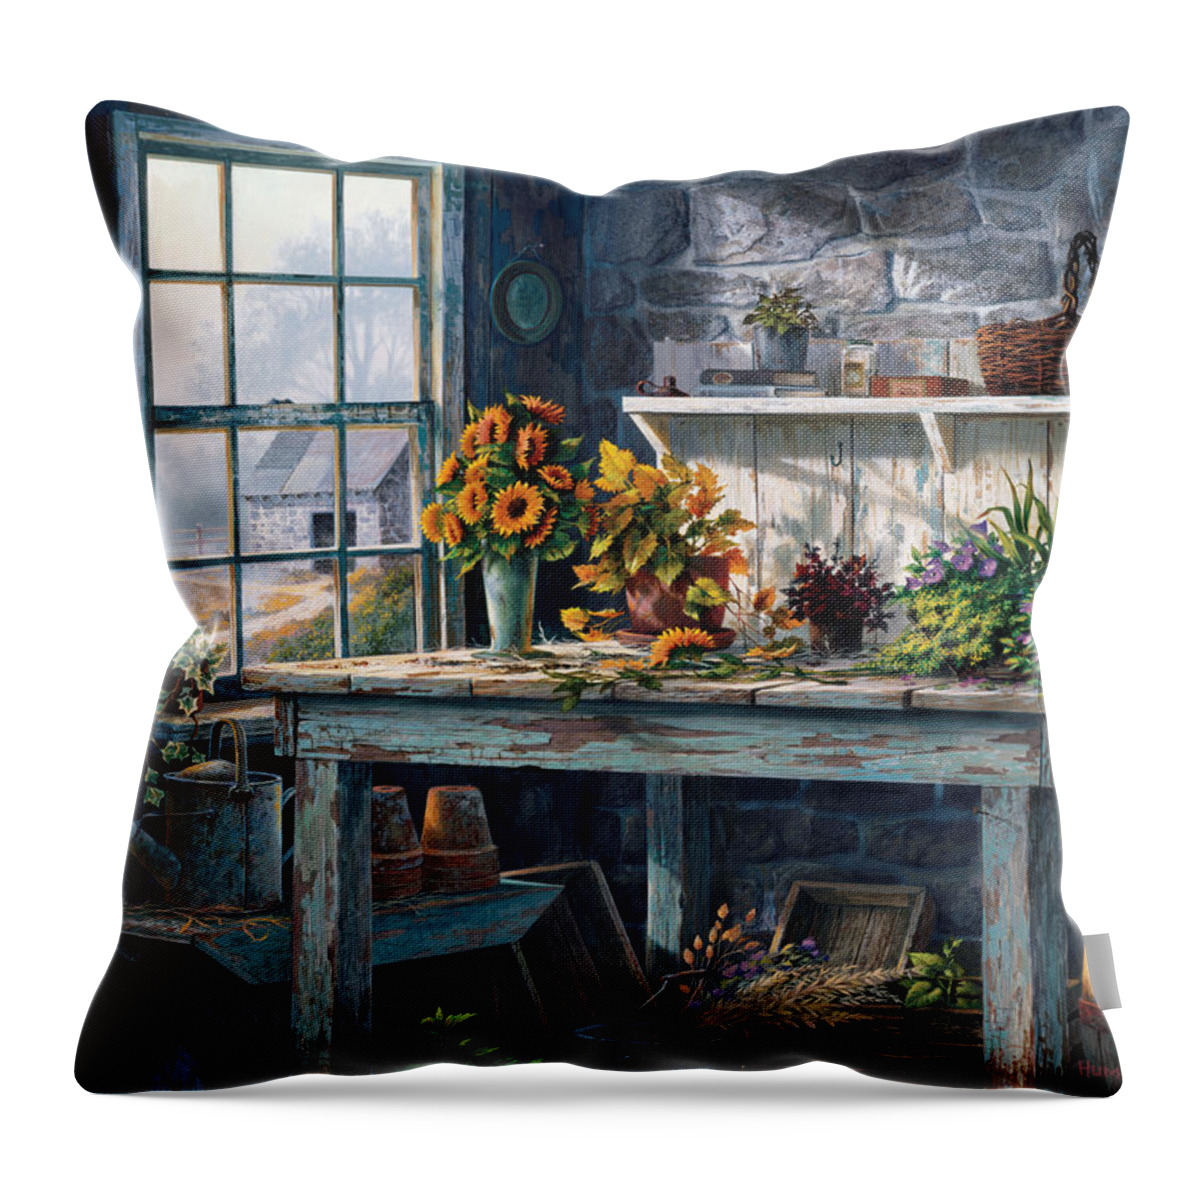 Michael Humphries Throw Pillow featuring the painting Sunlight Suite by Michael Humphries